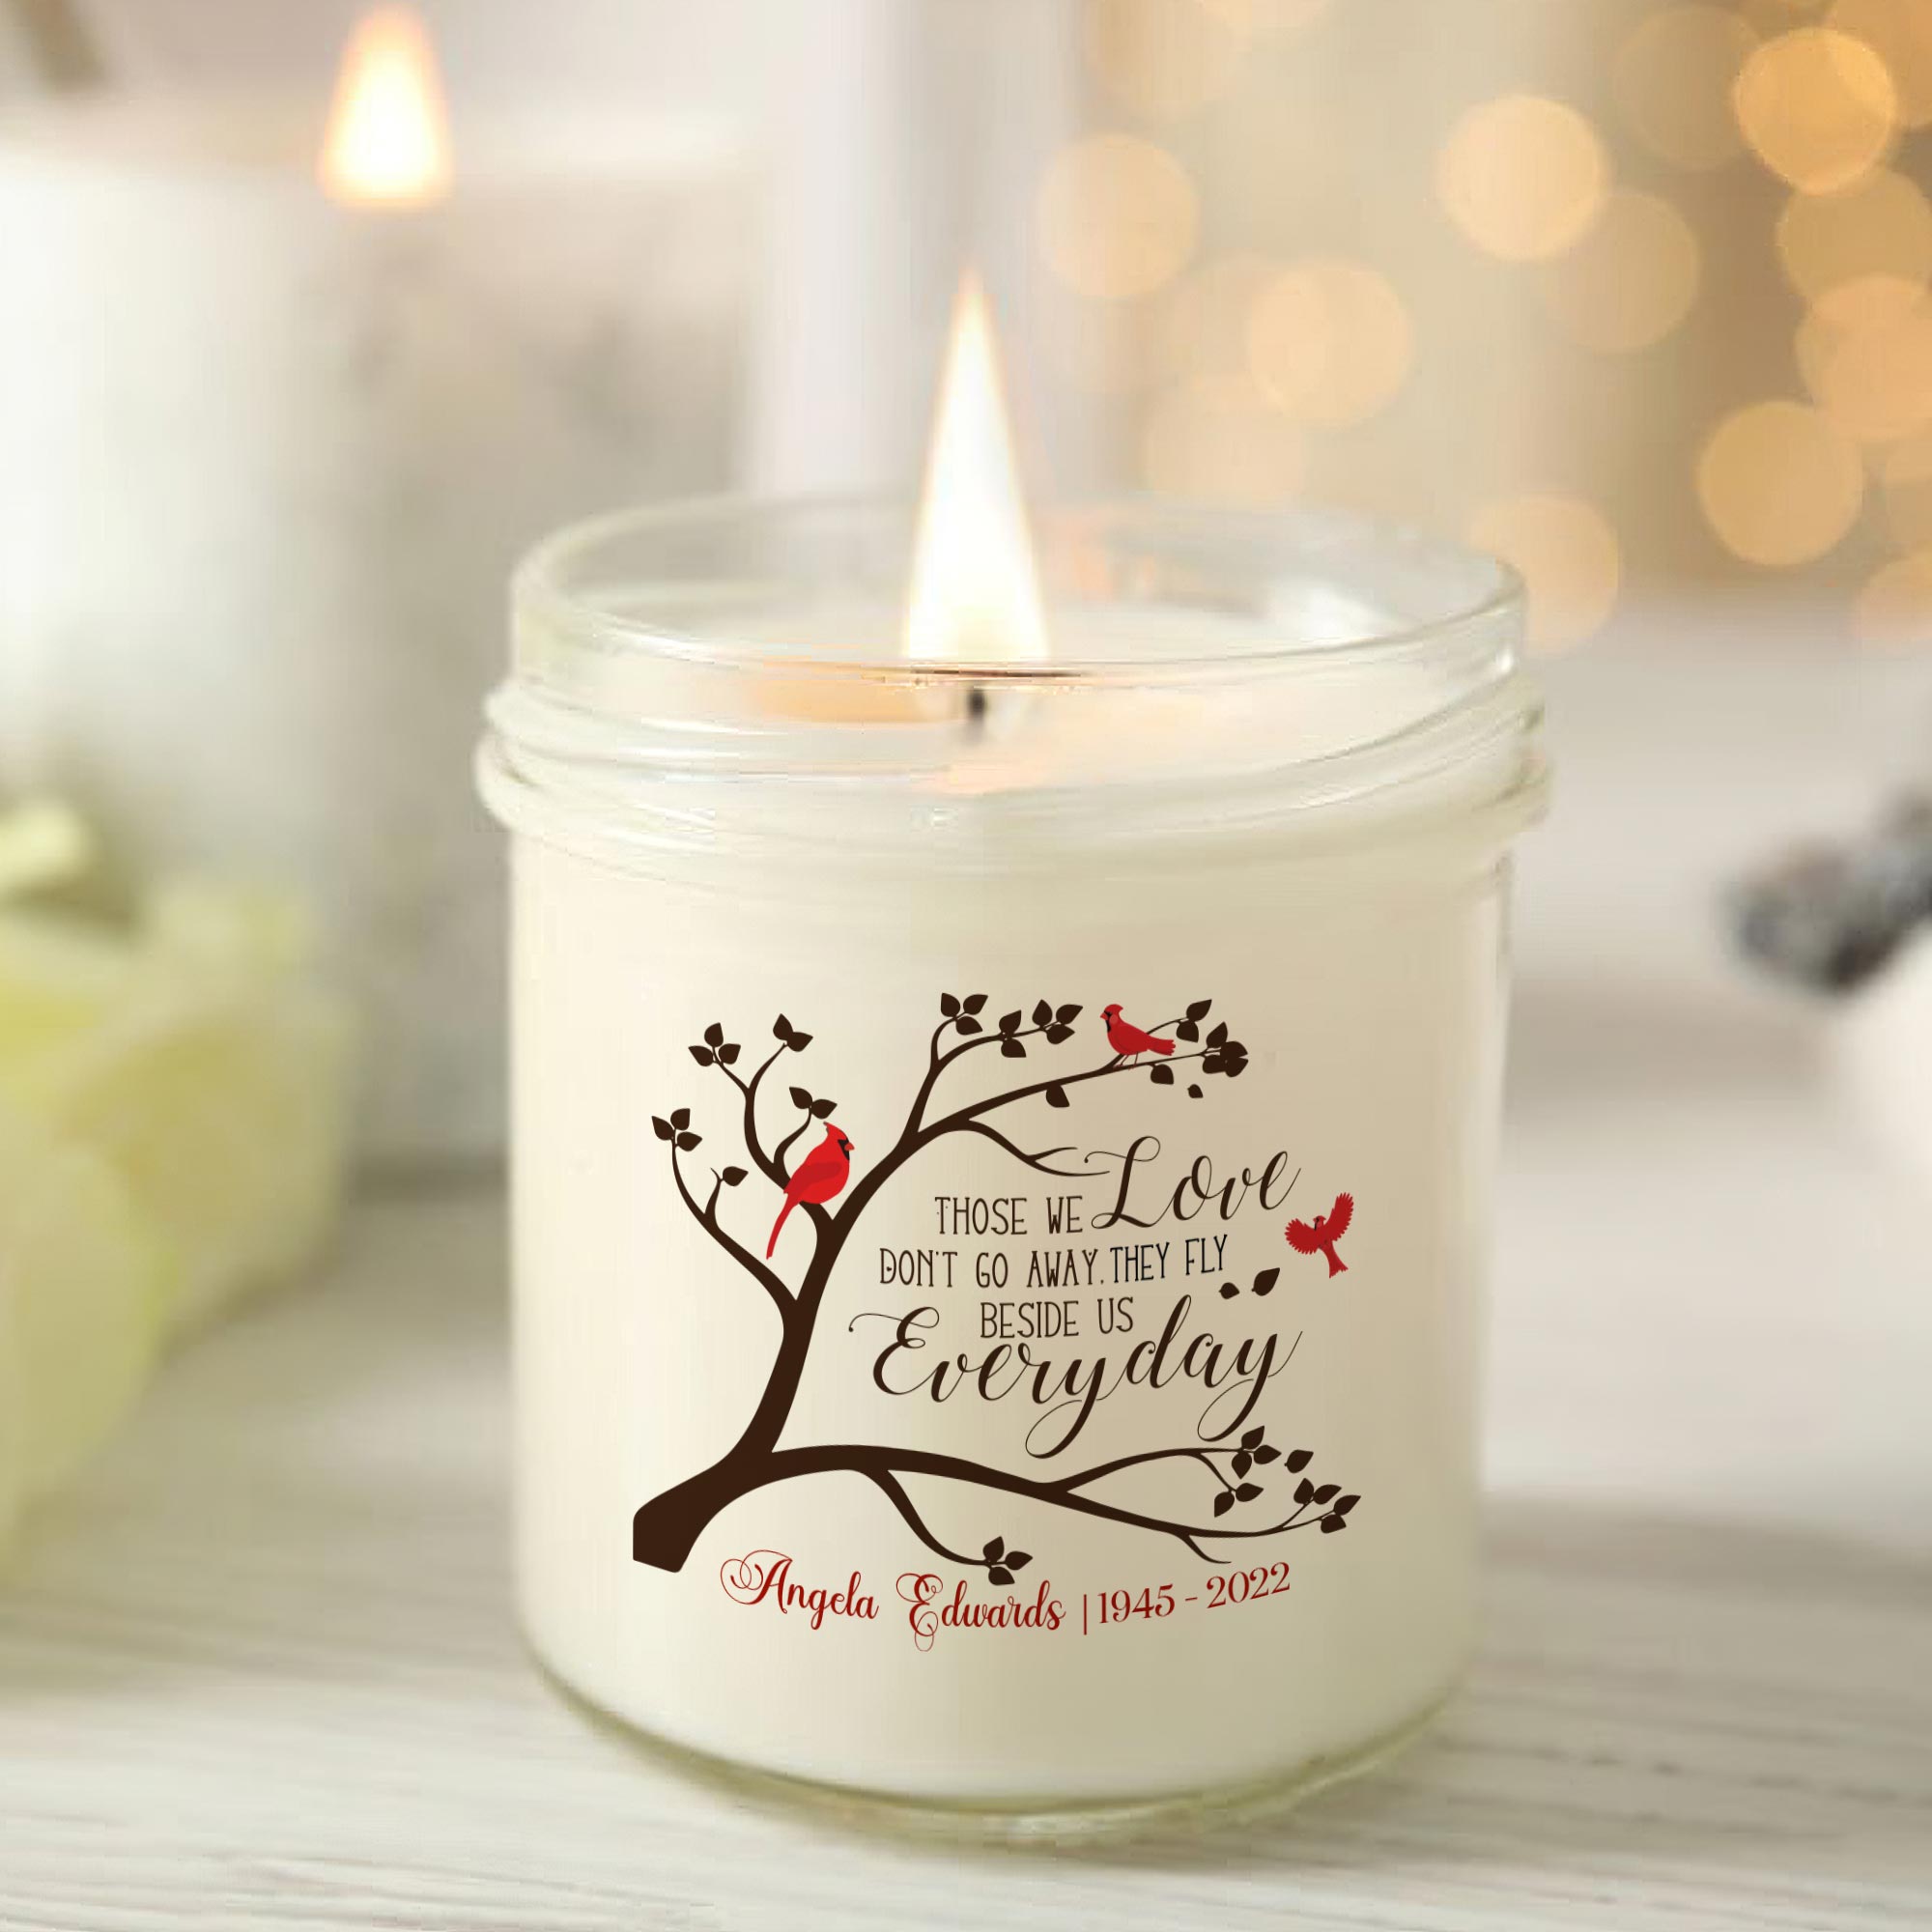 Those We Love Don't Go Away Memorial Candle, Candle In Memory Of A Loved One, Candle Of Remembrance